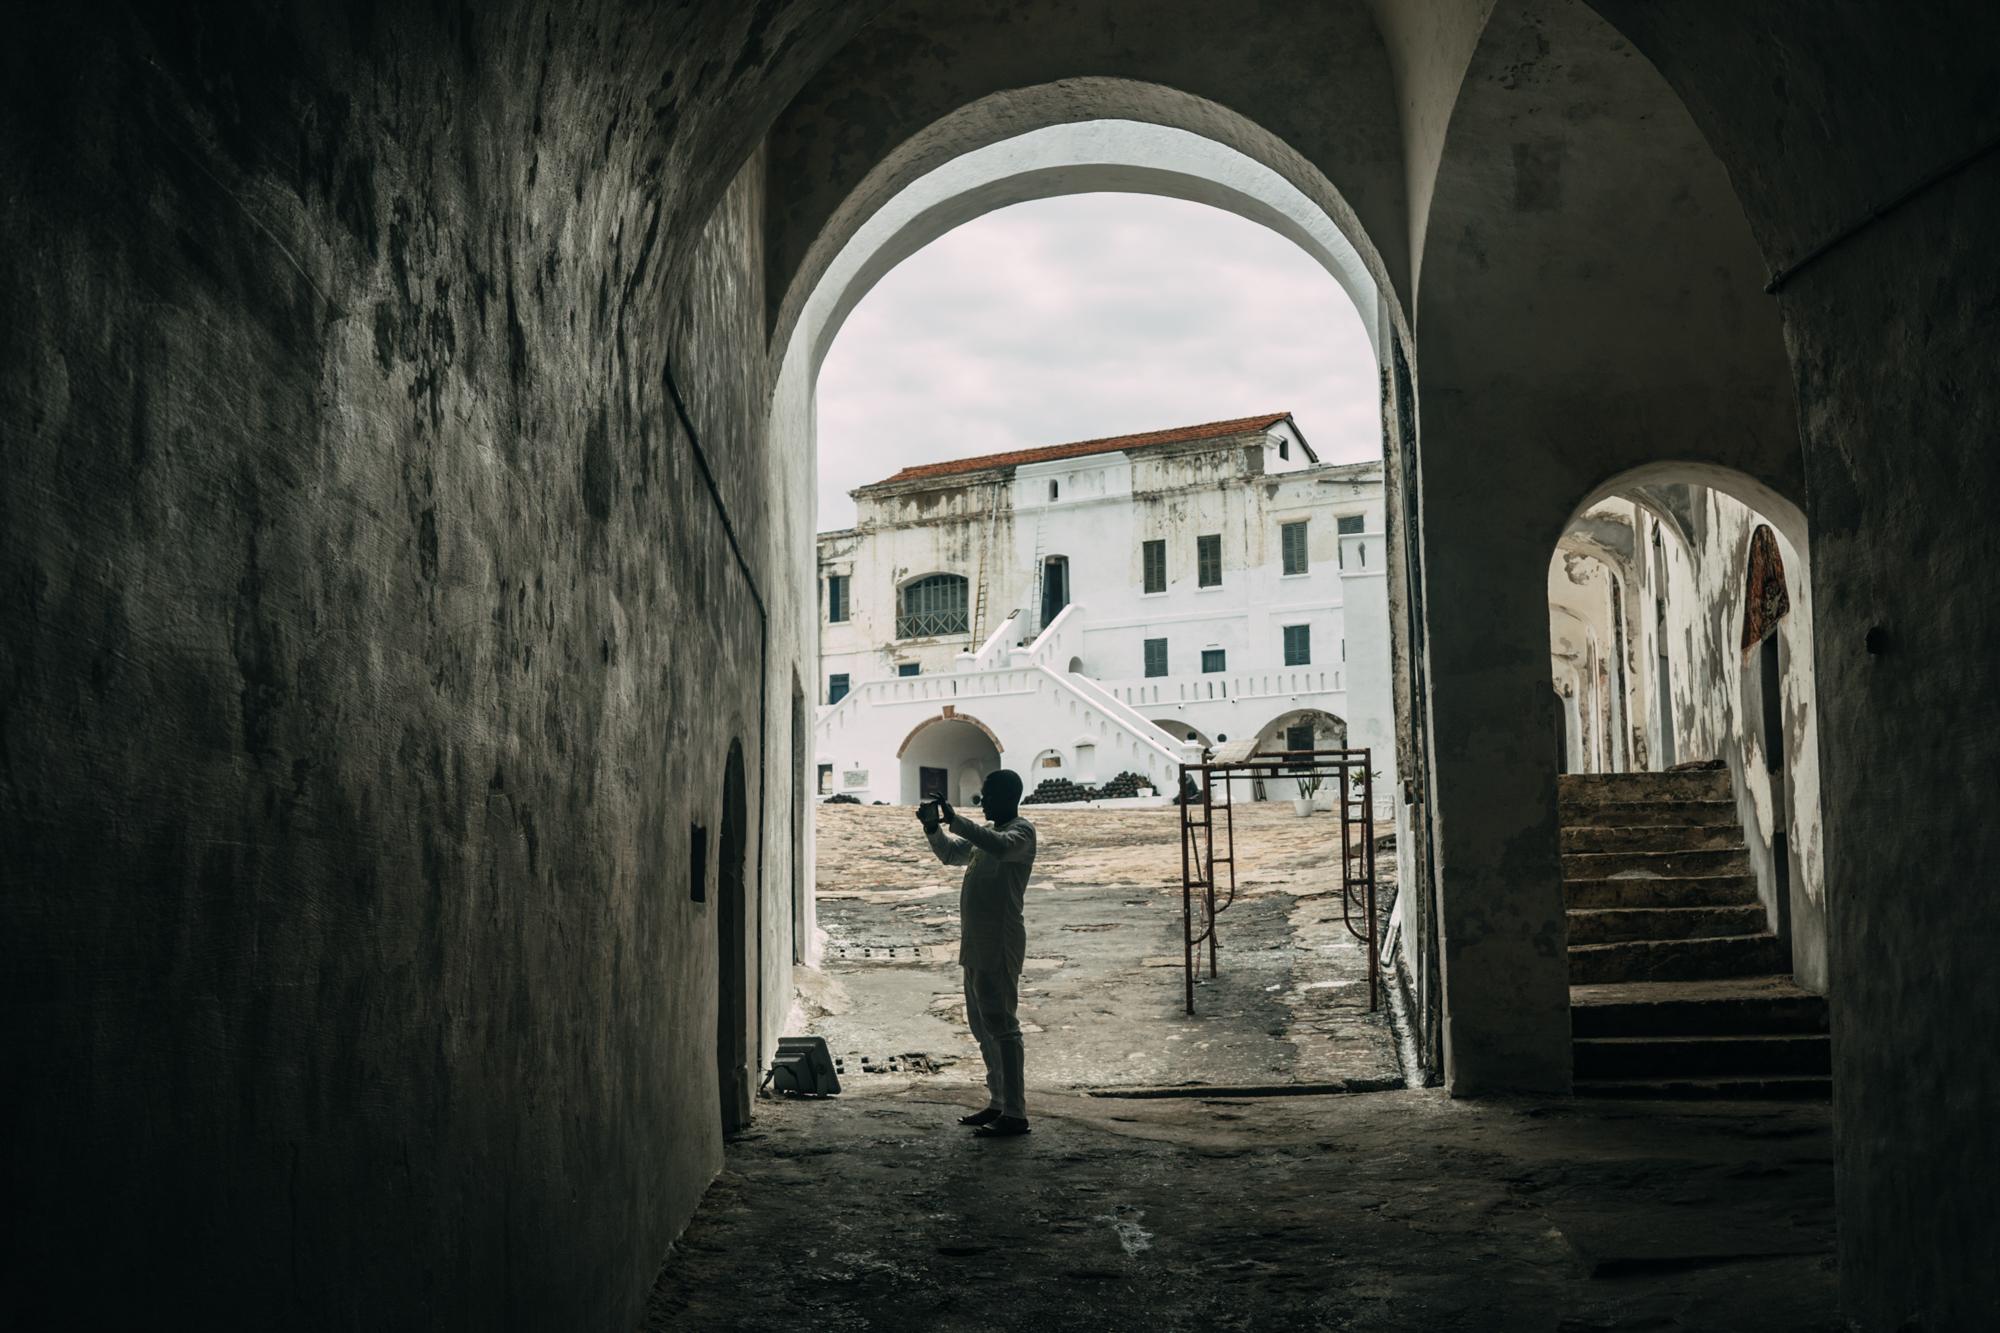 The Year of Return - A man takes a picture of a dungeon at the Cape Coast Castle.